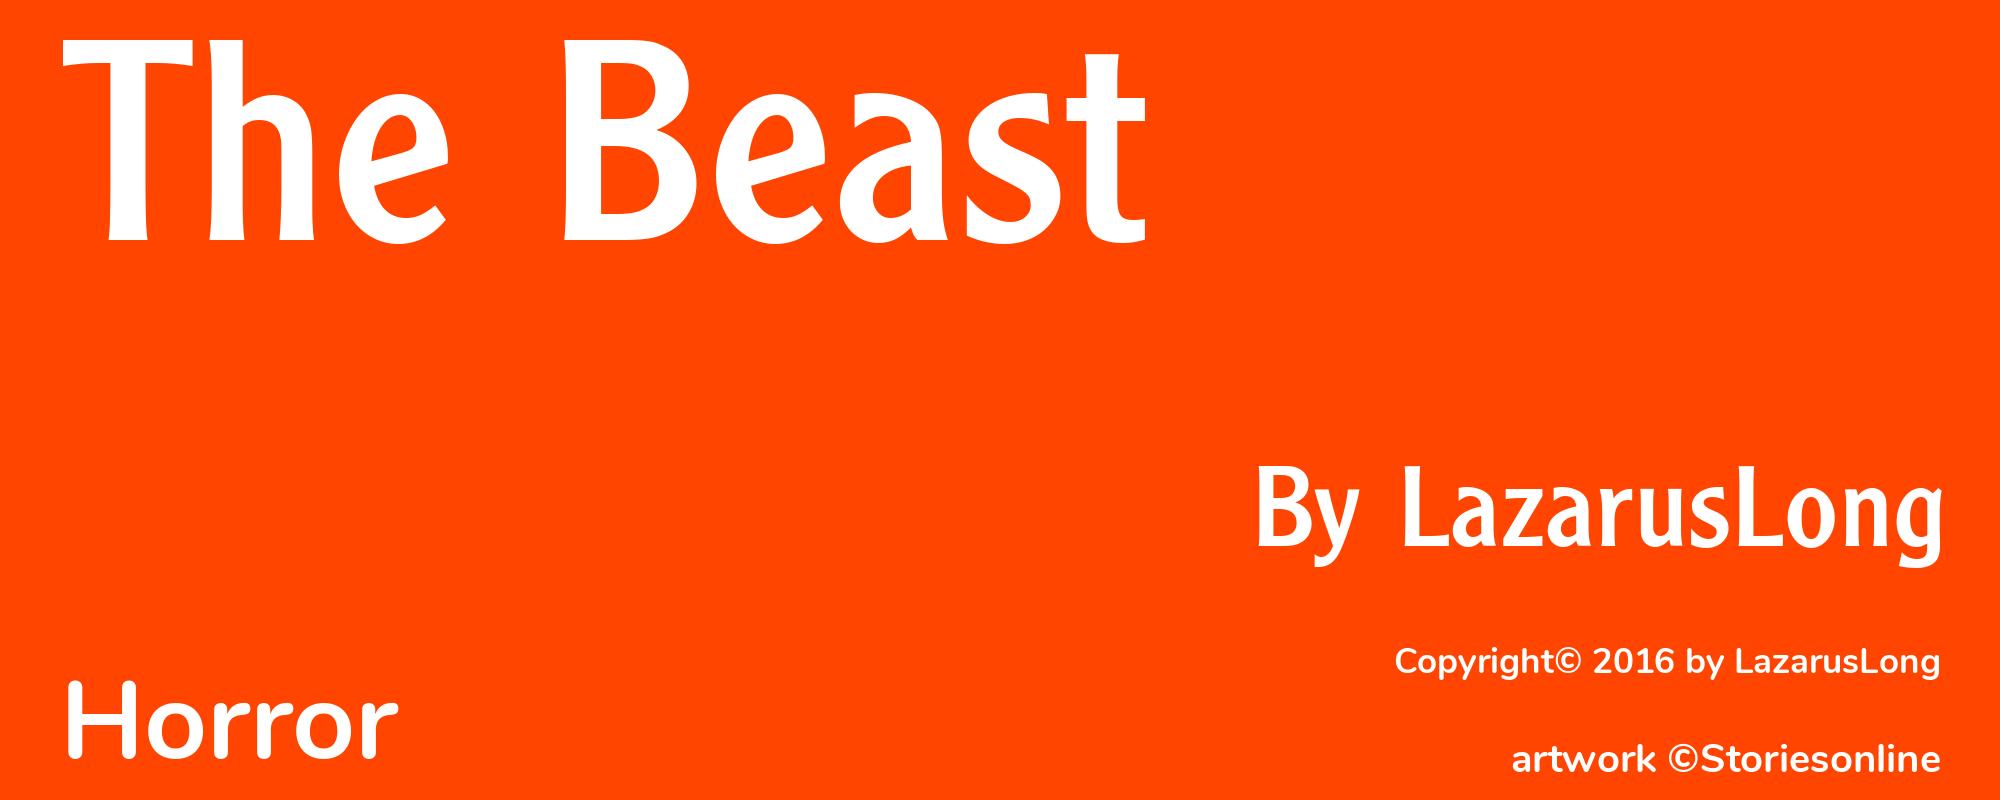 The Beast - Cover